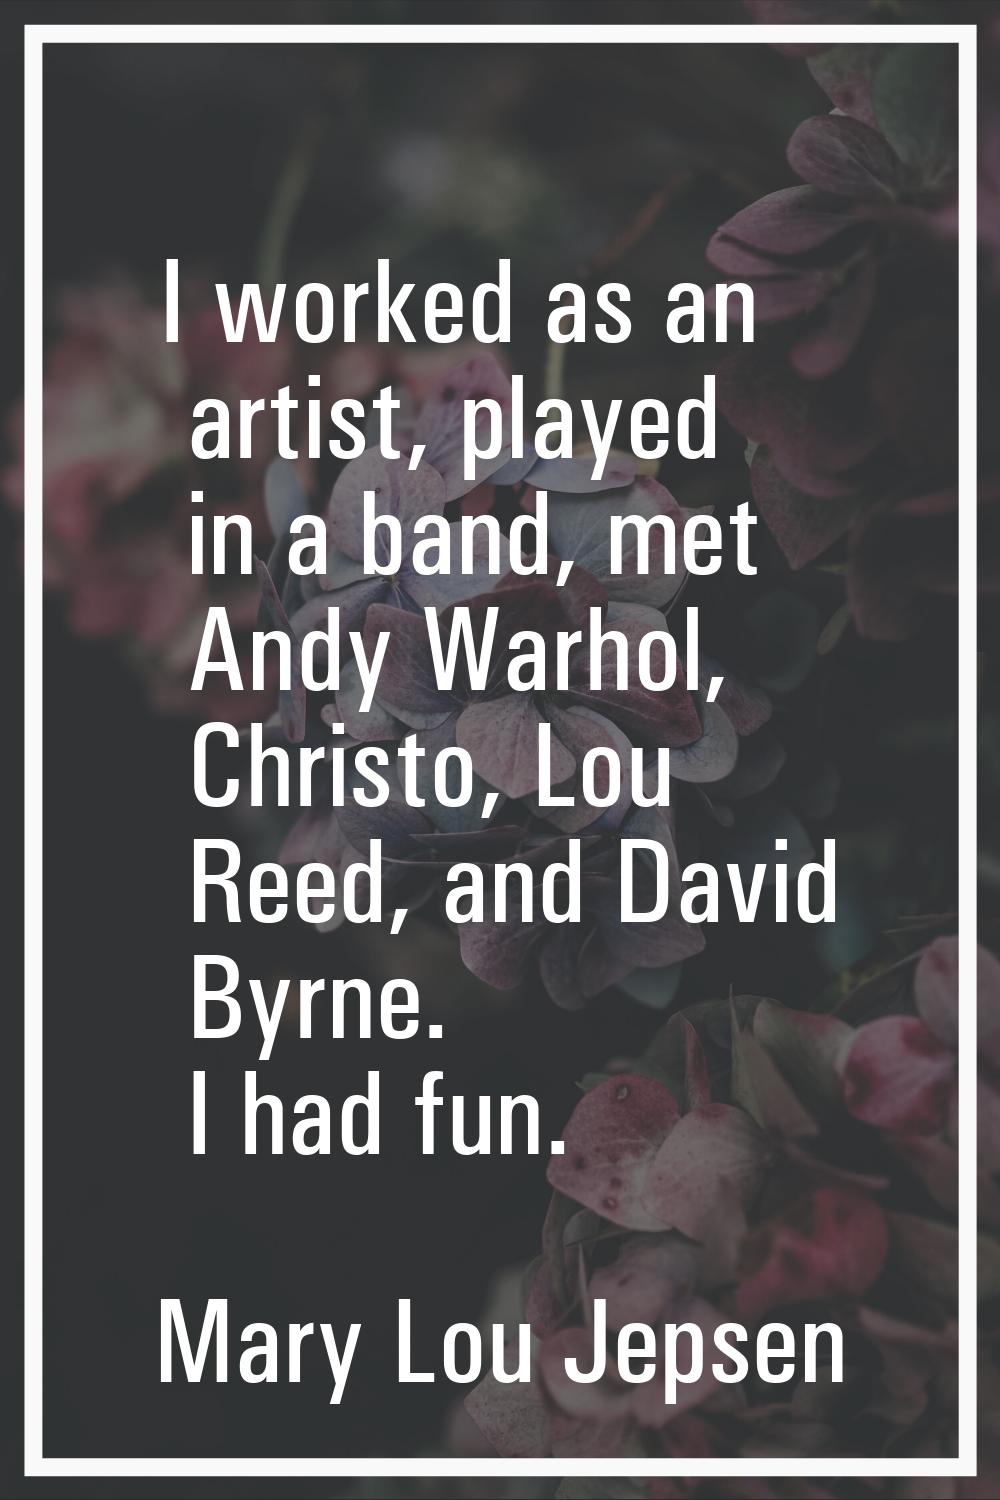 I worked as an artist, played in a band, met Andy Warhol, Christo, Lou Reed, and David Byrne. I had